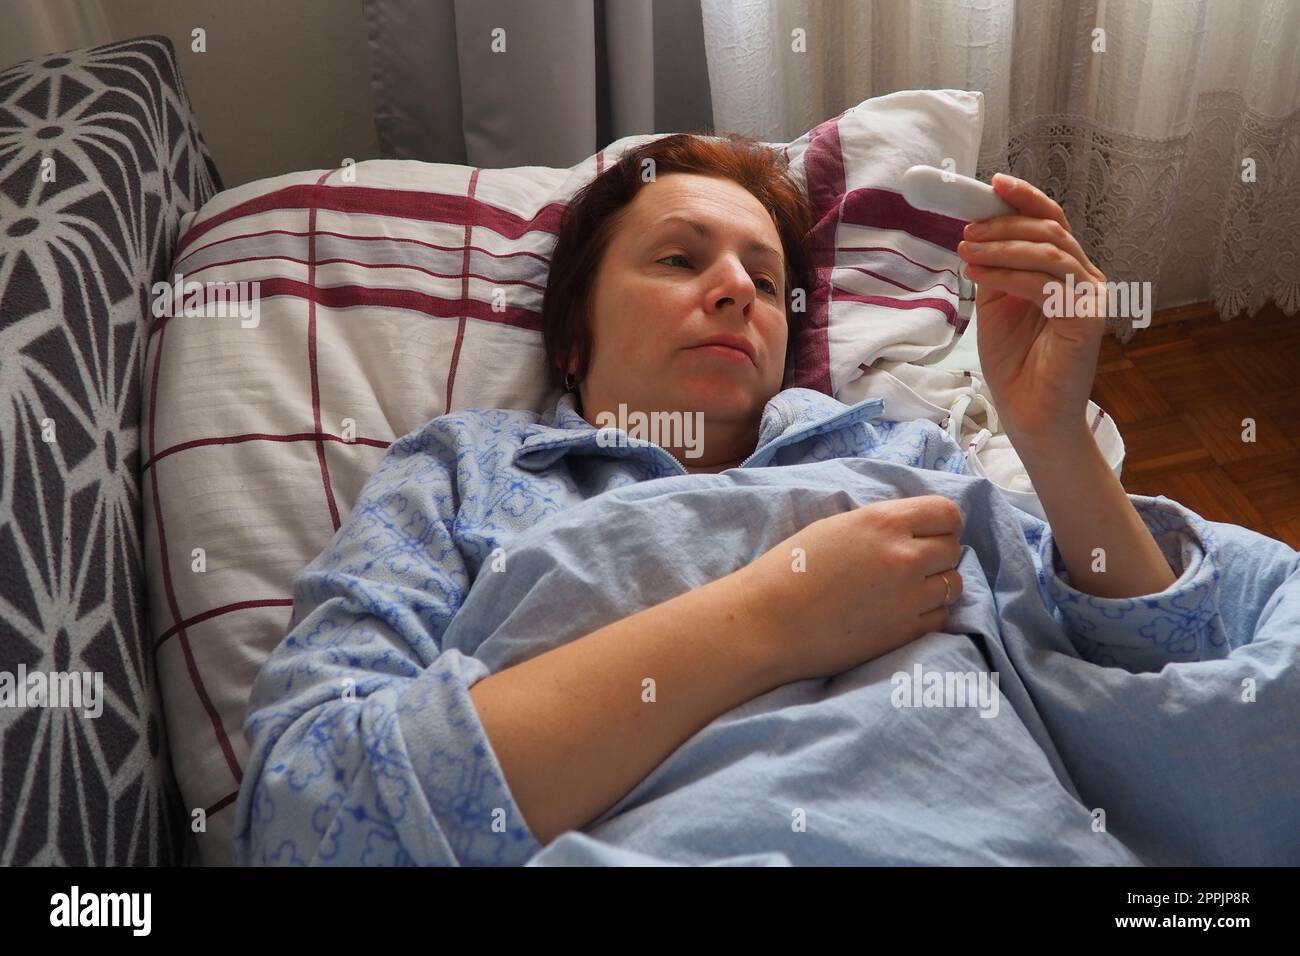 Sick woman in bed. Headache, runny nose and cold. Paleness of the face and faintness of the body. Feeling unwell. The patient lies on a pillow, holds a thermometer and measures the temperature. Stock Photo